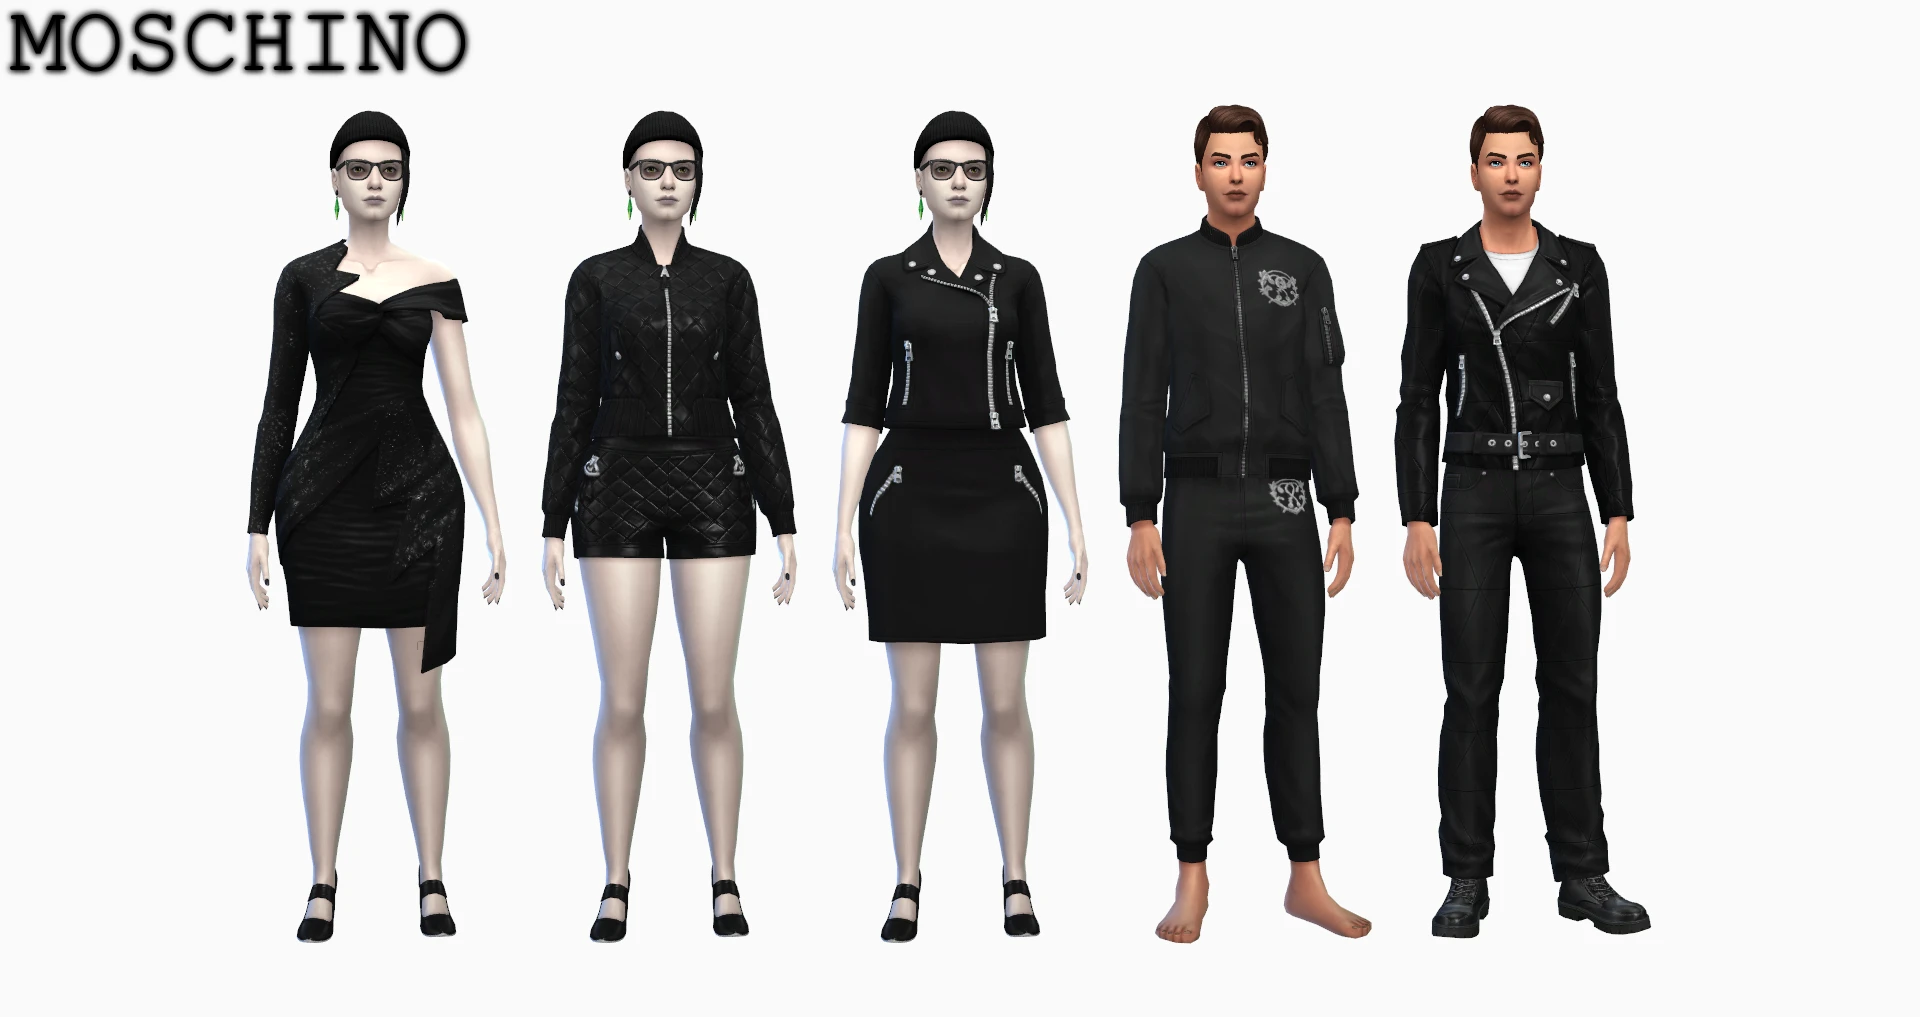 Gloomy Swatches Overhaul at The Sims 4 Nexus - Mods and community